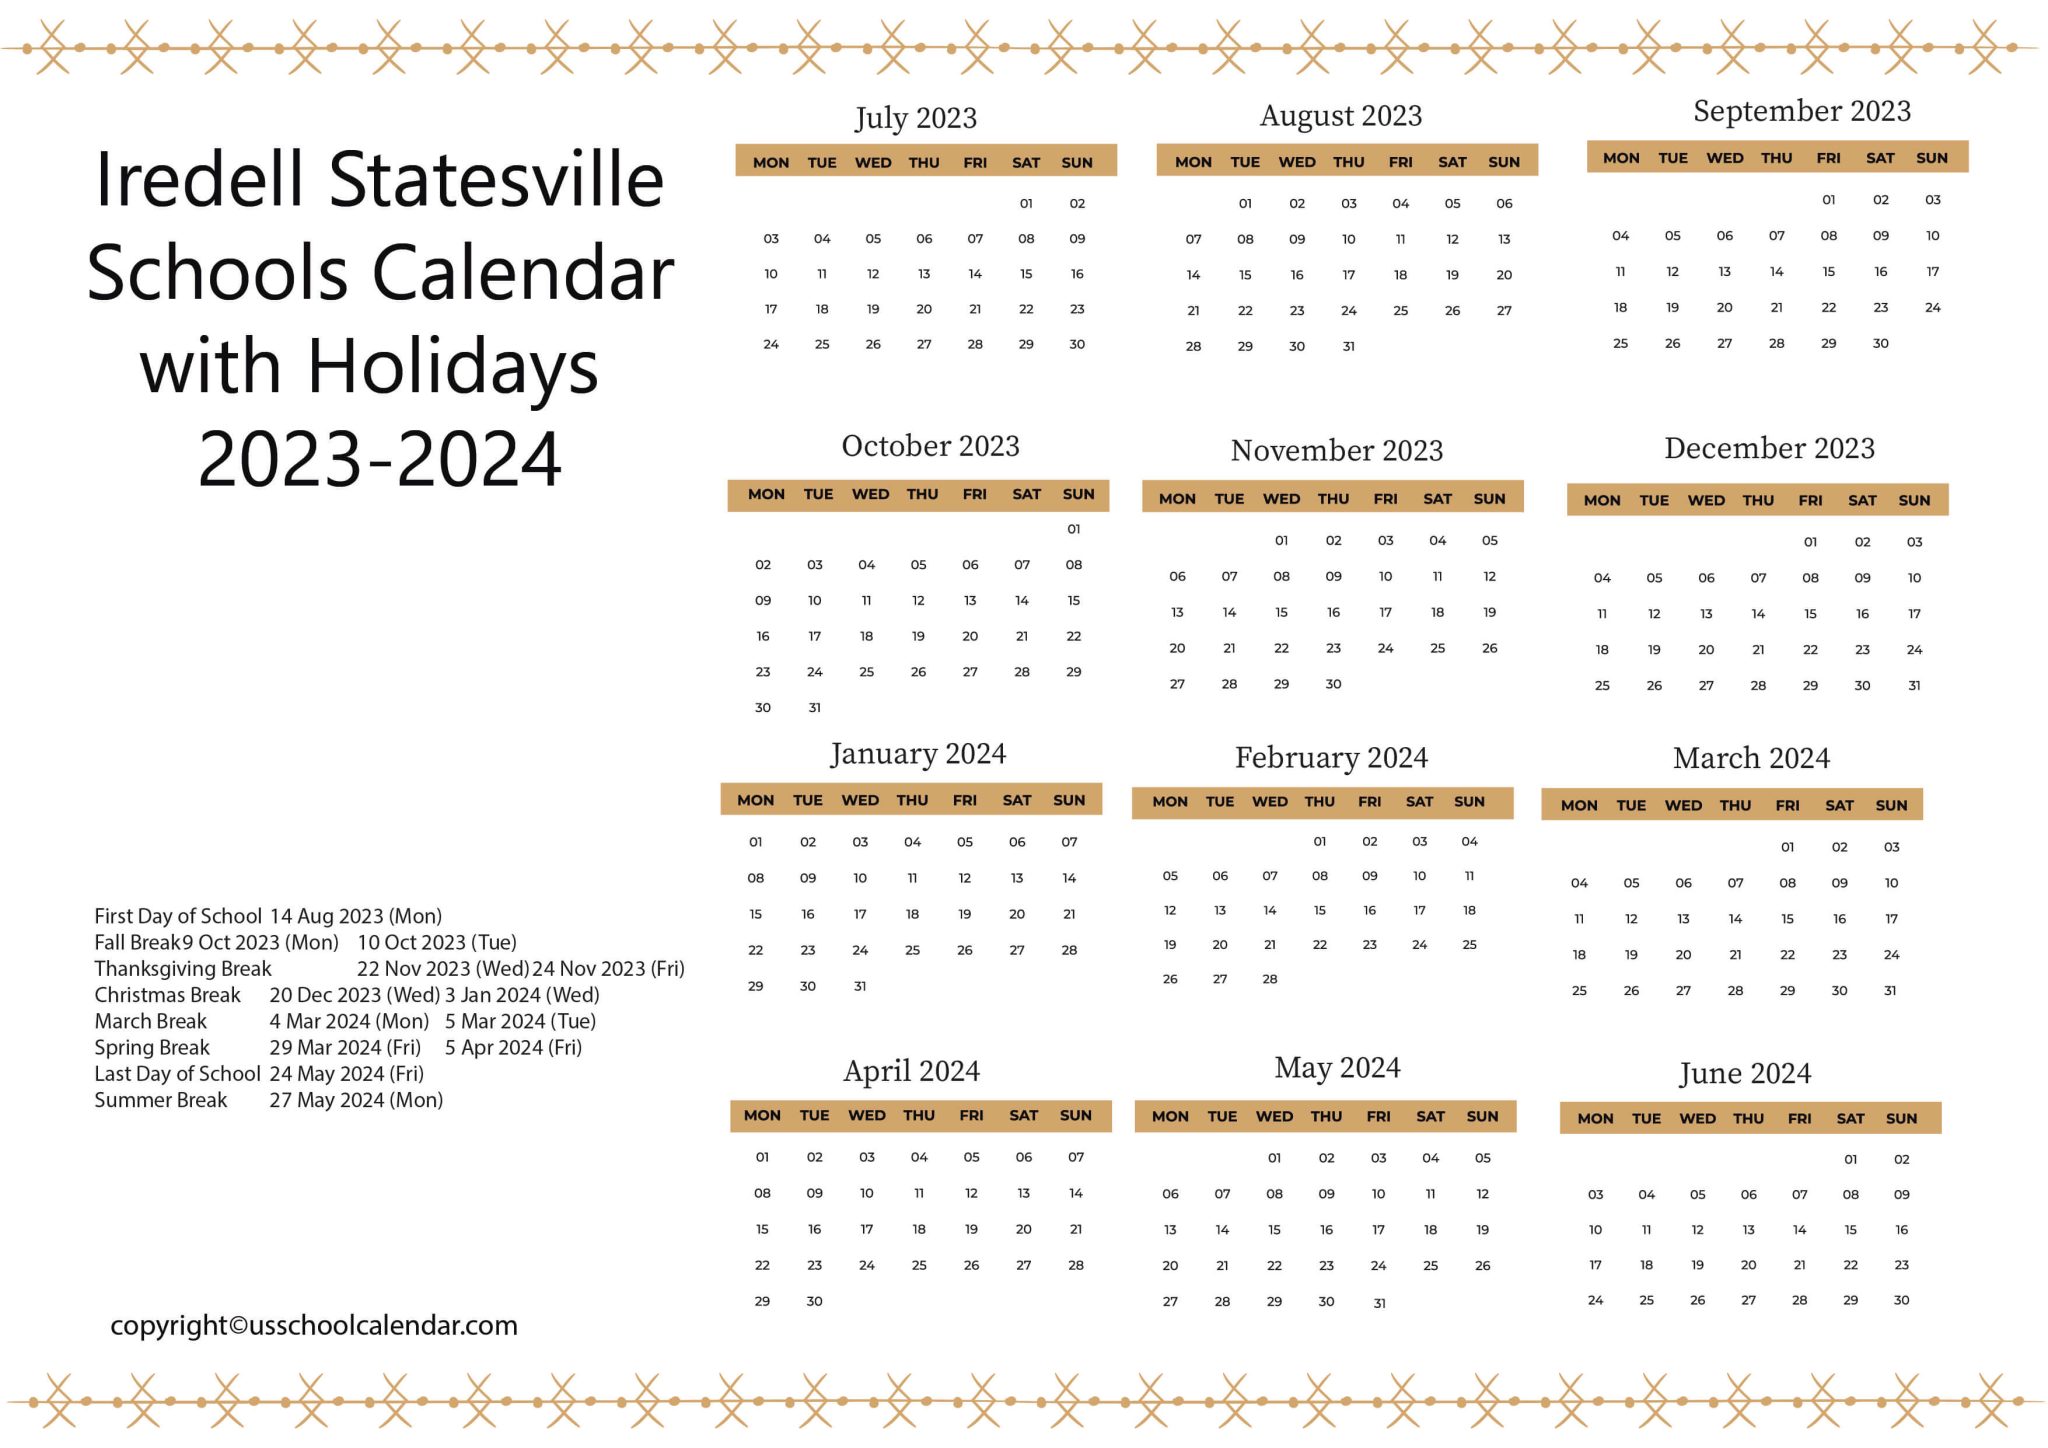 Iredell Statesville Schools Calendar with Holidays 2023 2024